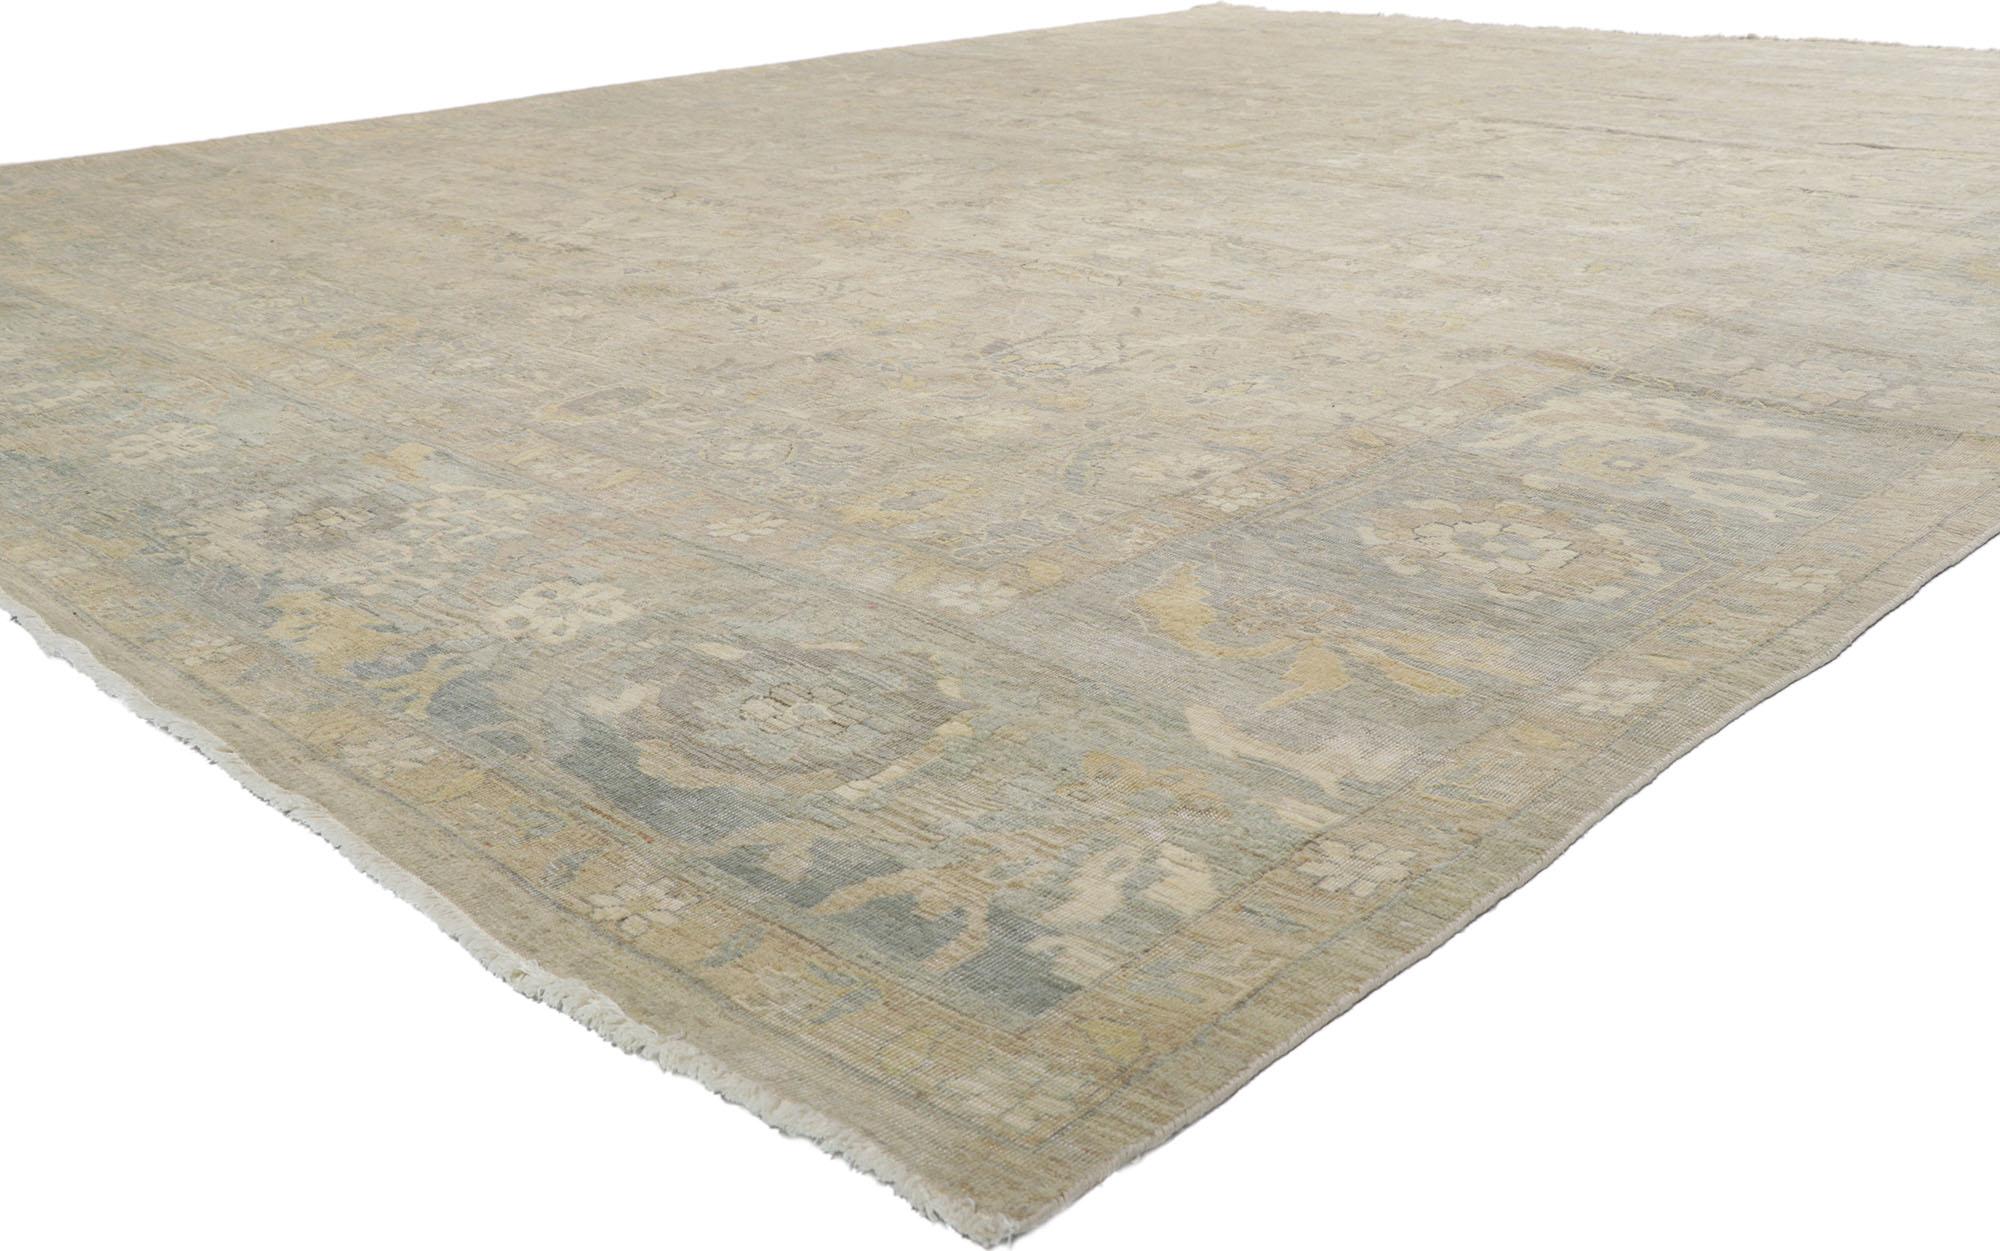 30719 New Contemporary Distressed rug, 11'07 x 14'10. With its neutral colors and weathered beauty combined with nostalgic charm, this new contemporary distressed rug creates an inimitable warmth and calming ambiance. The geometric pattern and